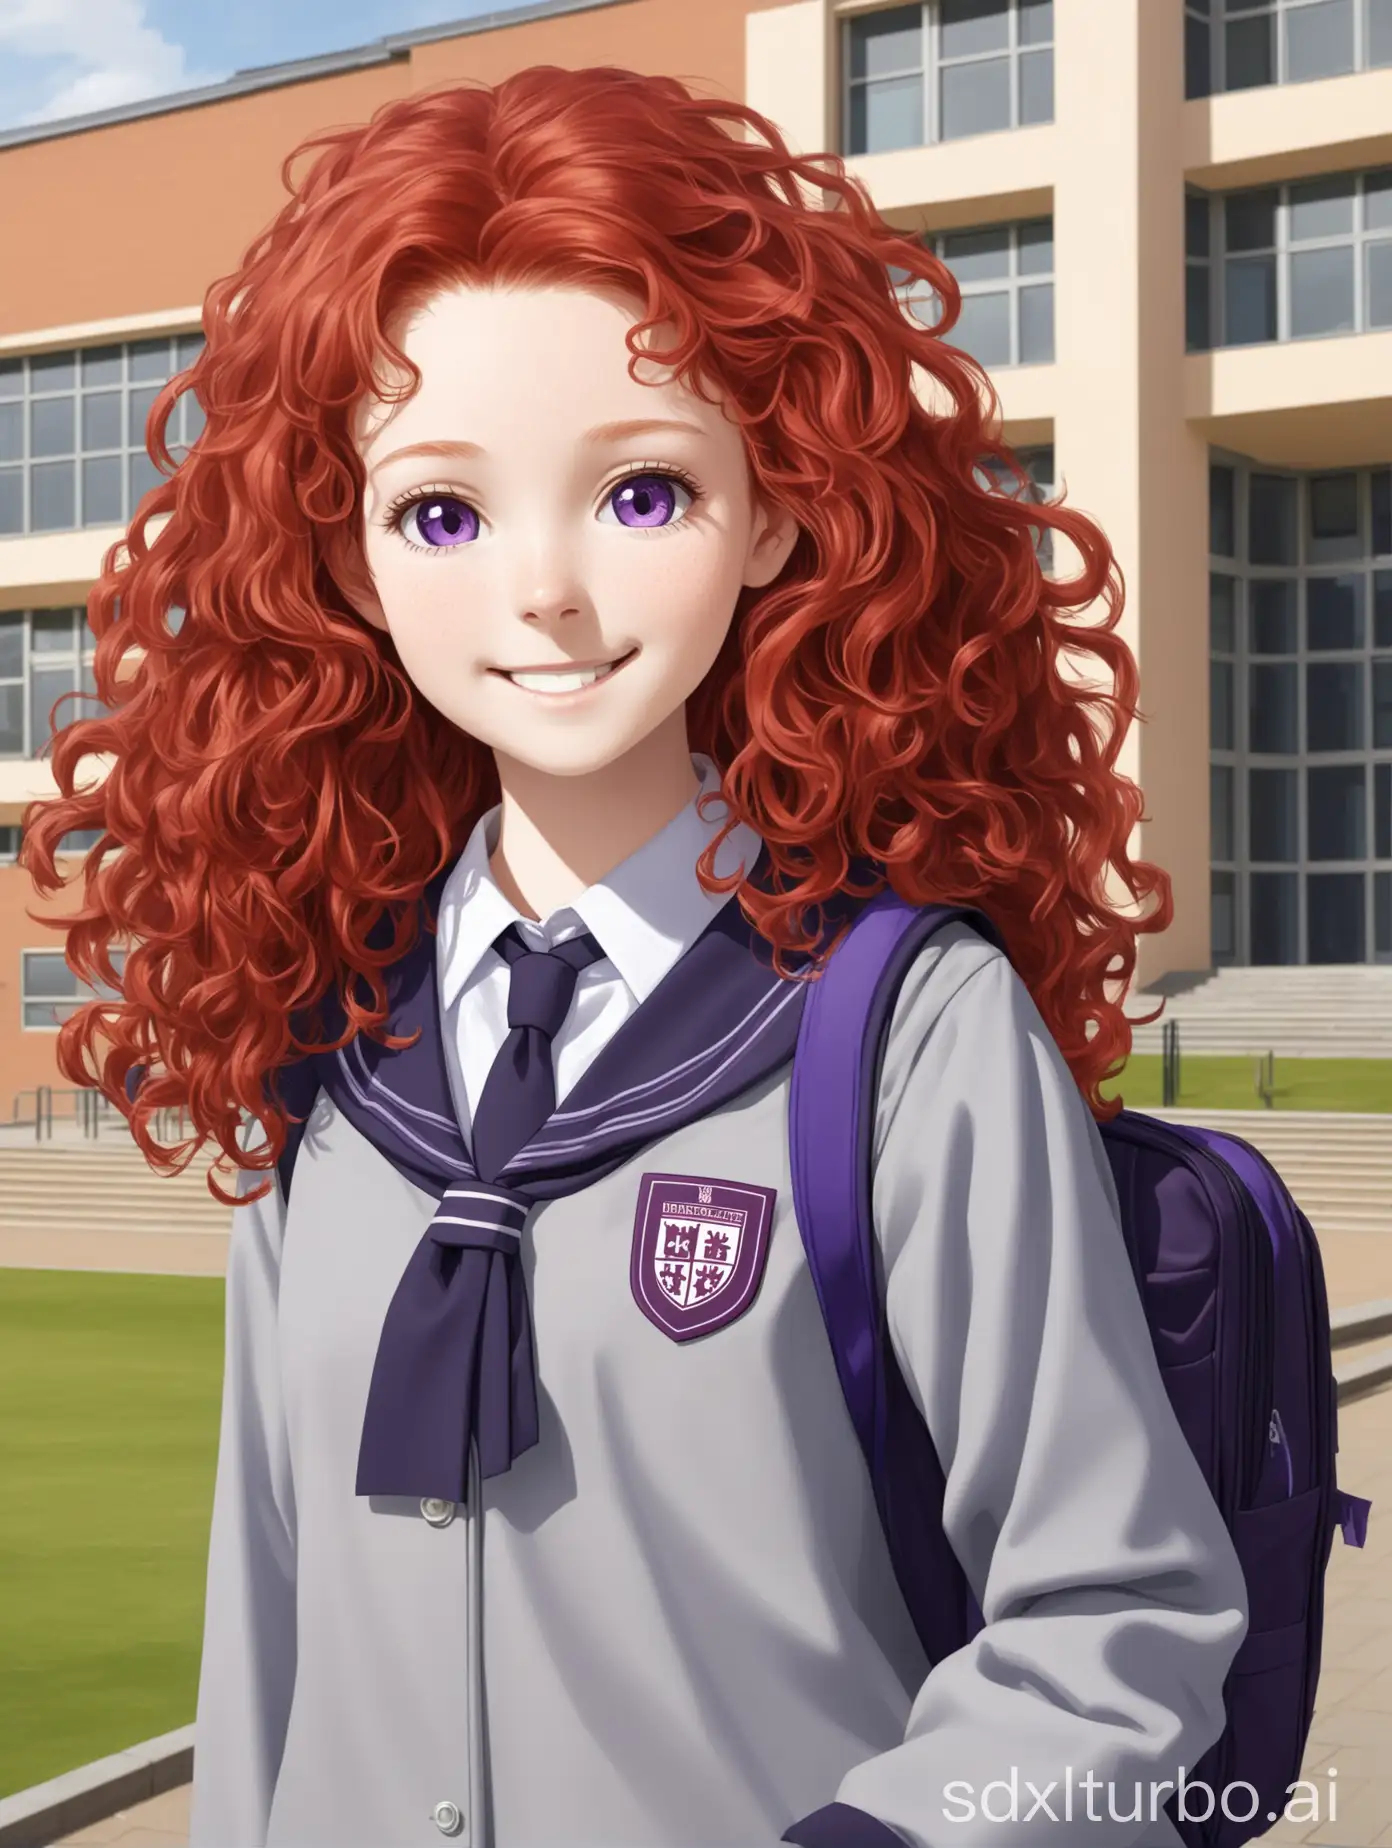 Smiling-Redhead-University-Student-in-Grey-and-Purple-Uniform